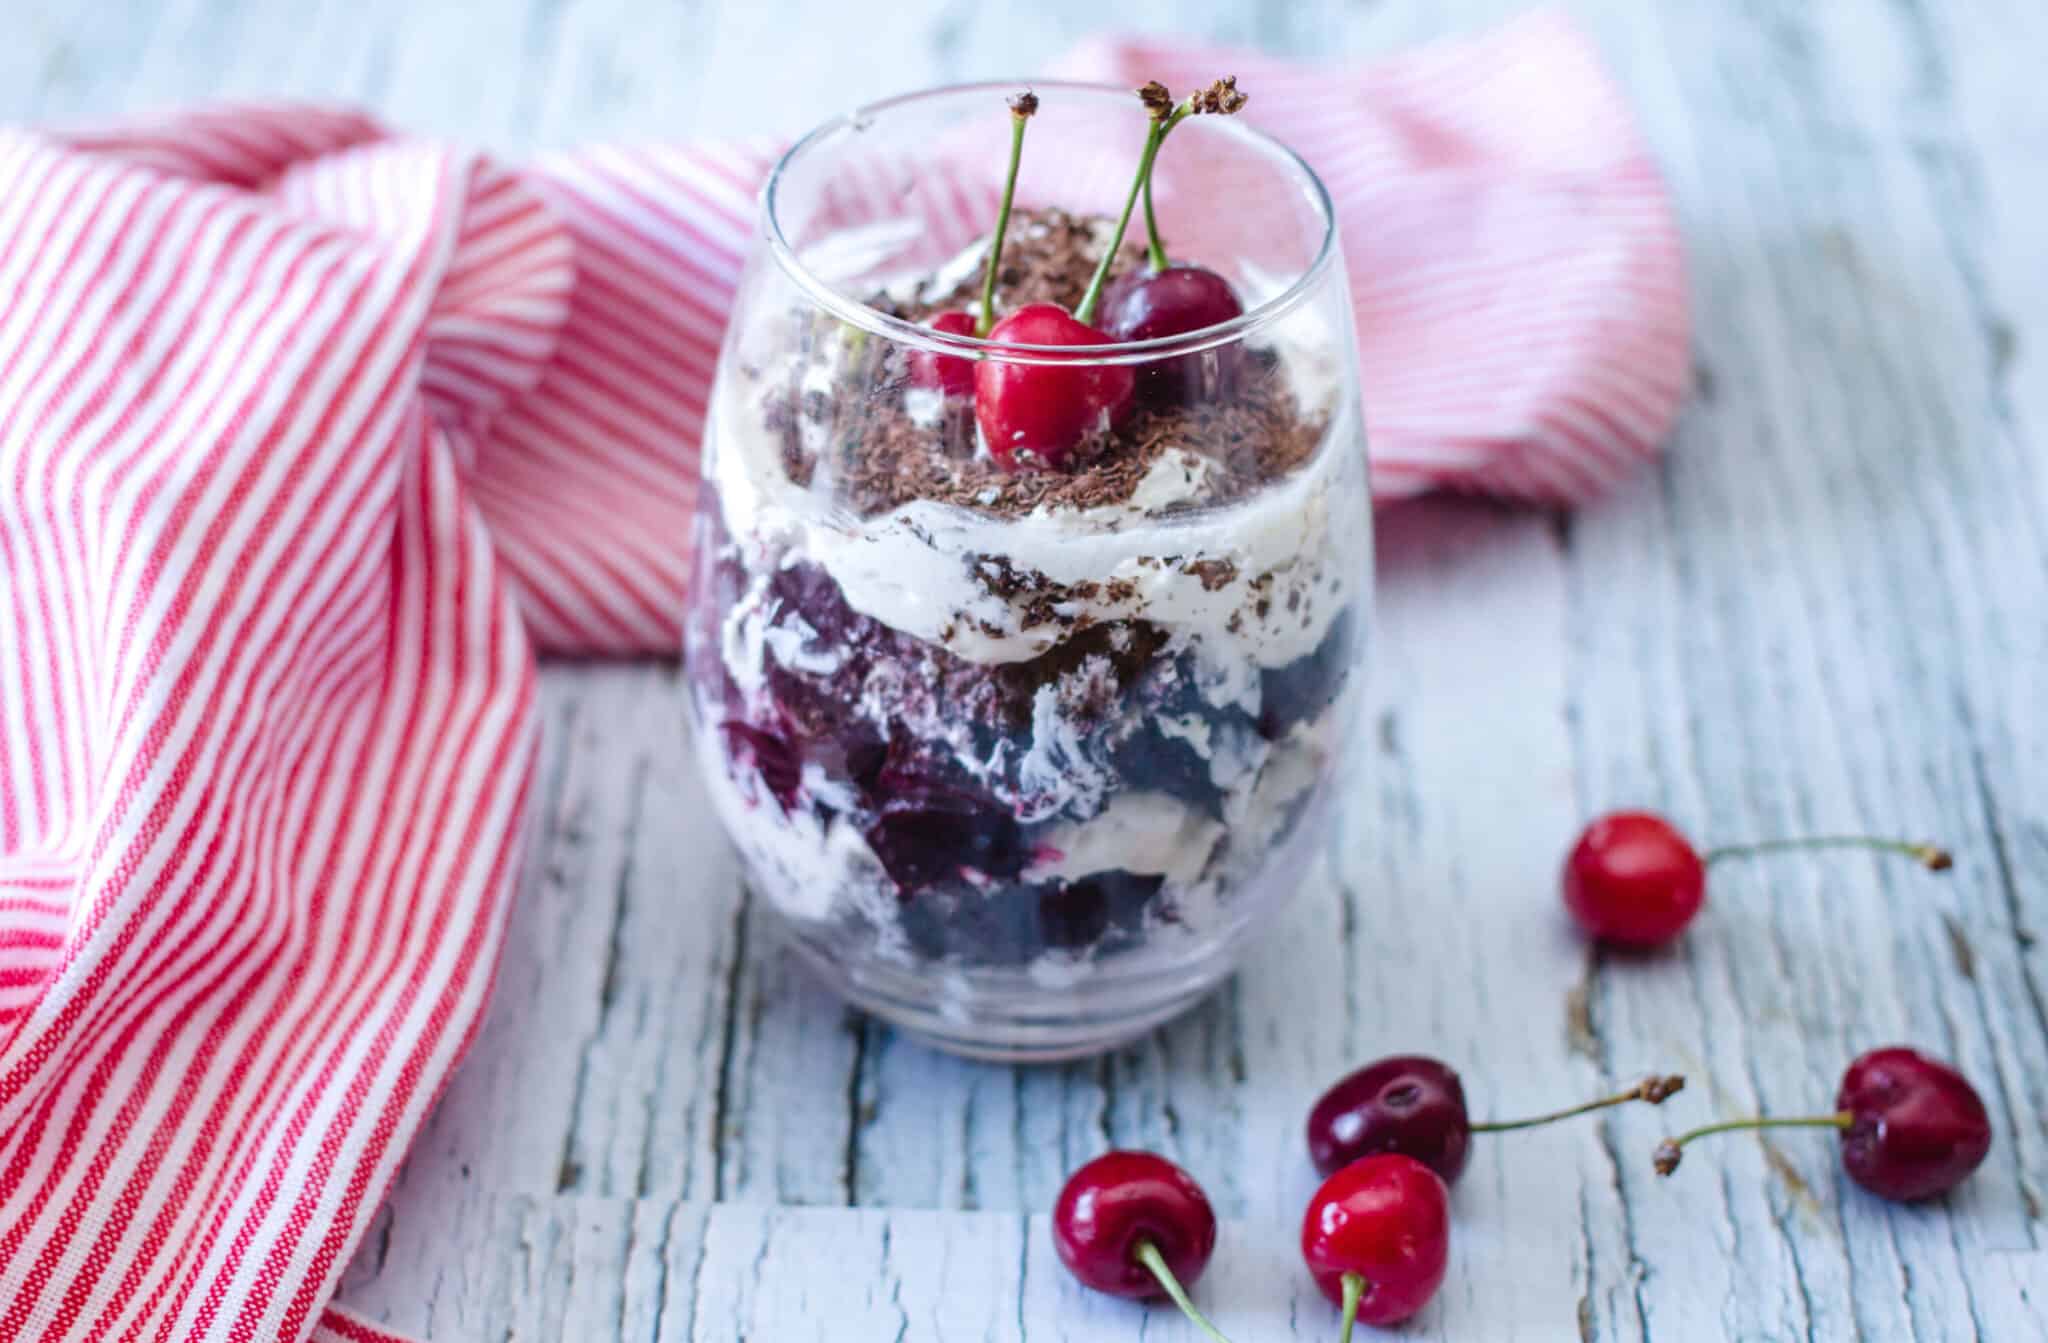 Black Forest Cake in a Glass